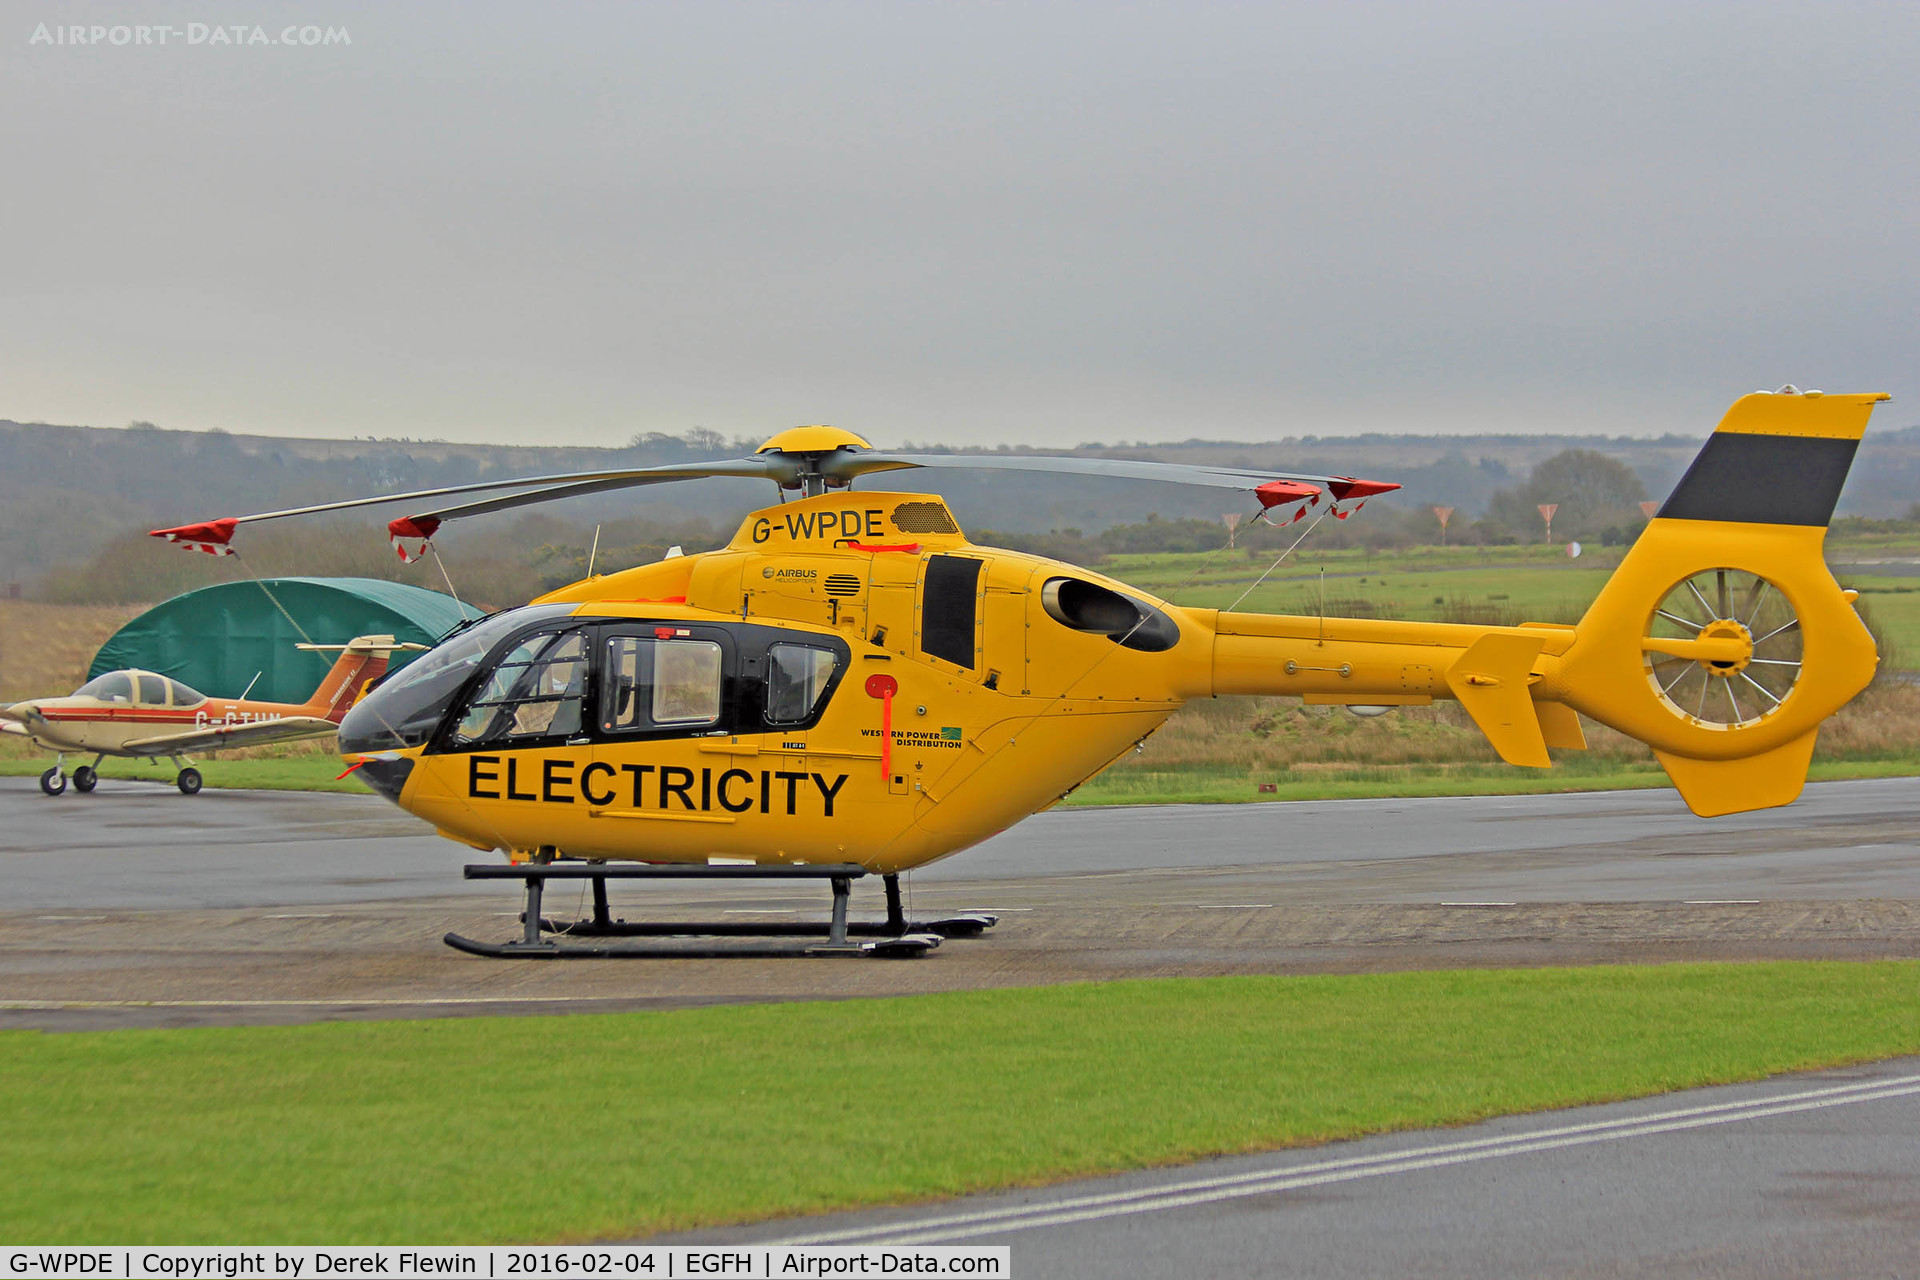 G-WPDE, 2015 Airbus Helicopters EC-135P-2+ C/N 1145, EC-135P-2+, WPD Helicopter Unit Bristol Lulsgate based, previously D-HECP, temp based at Swansea.